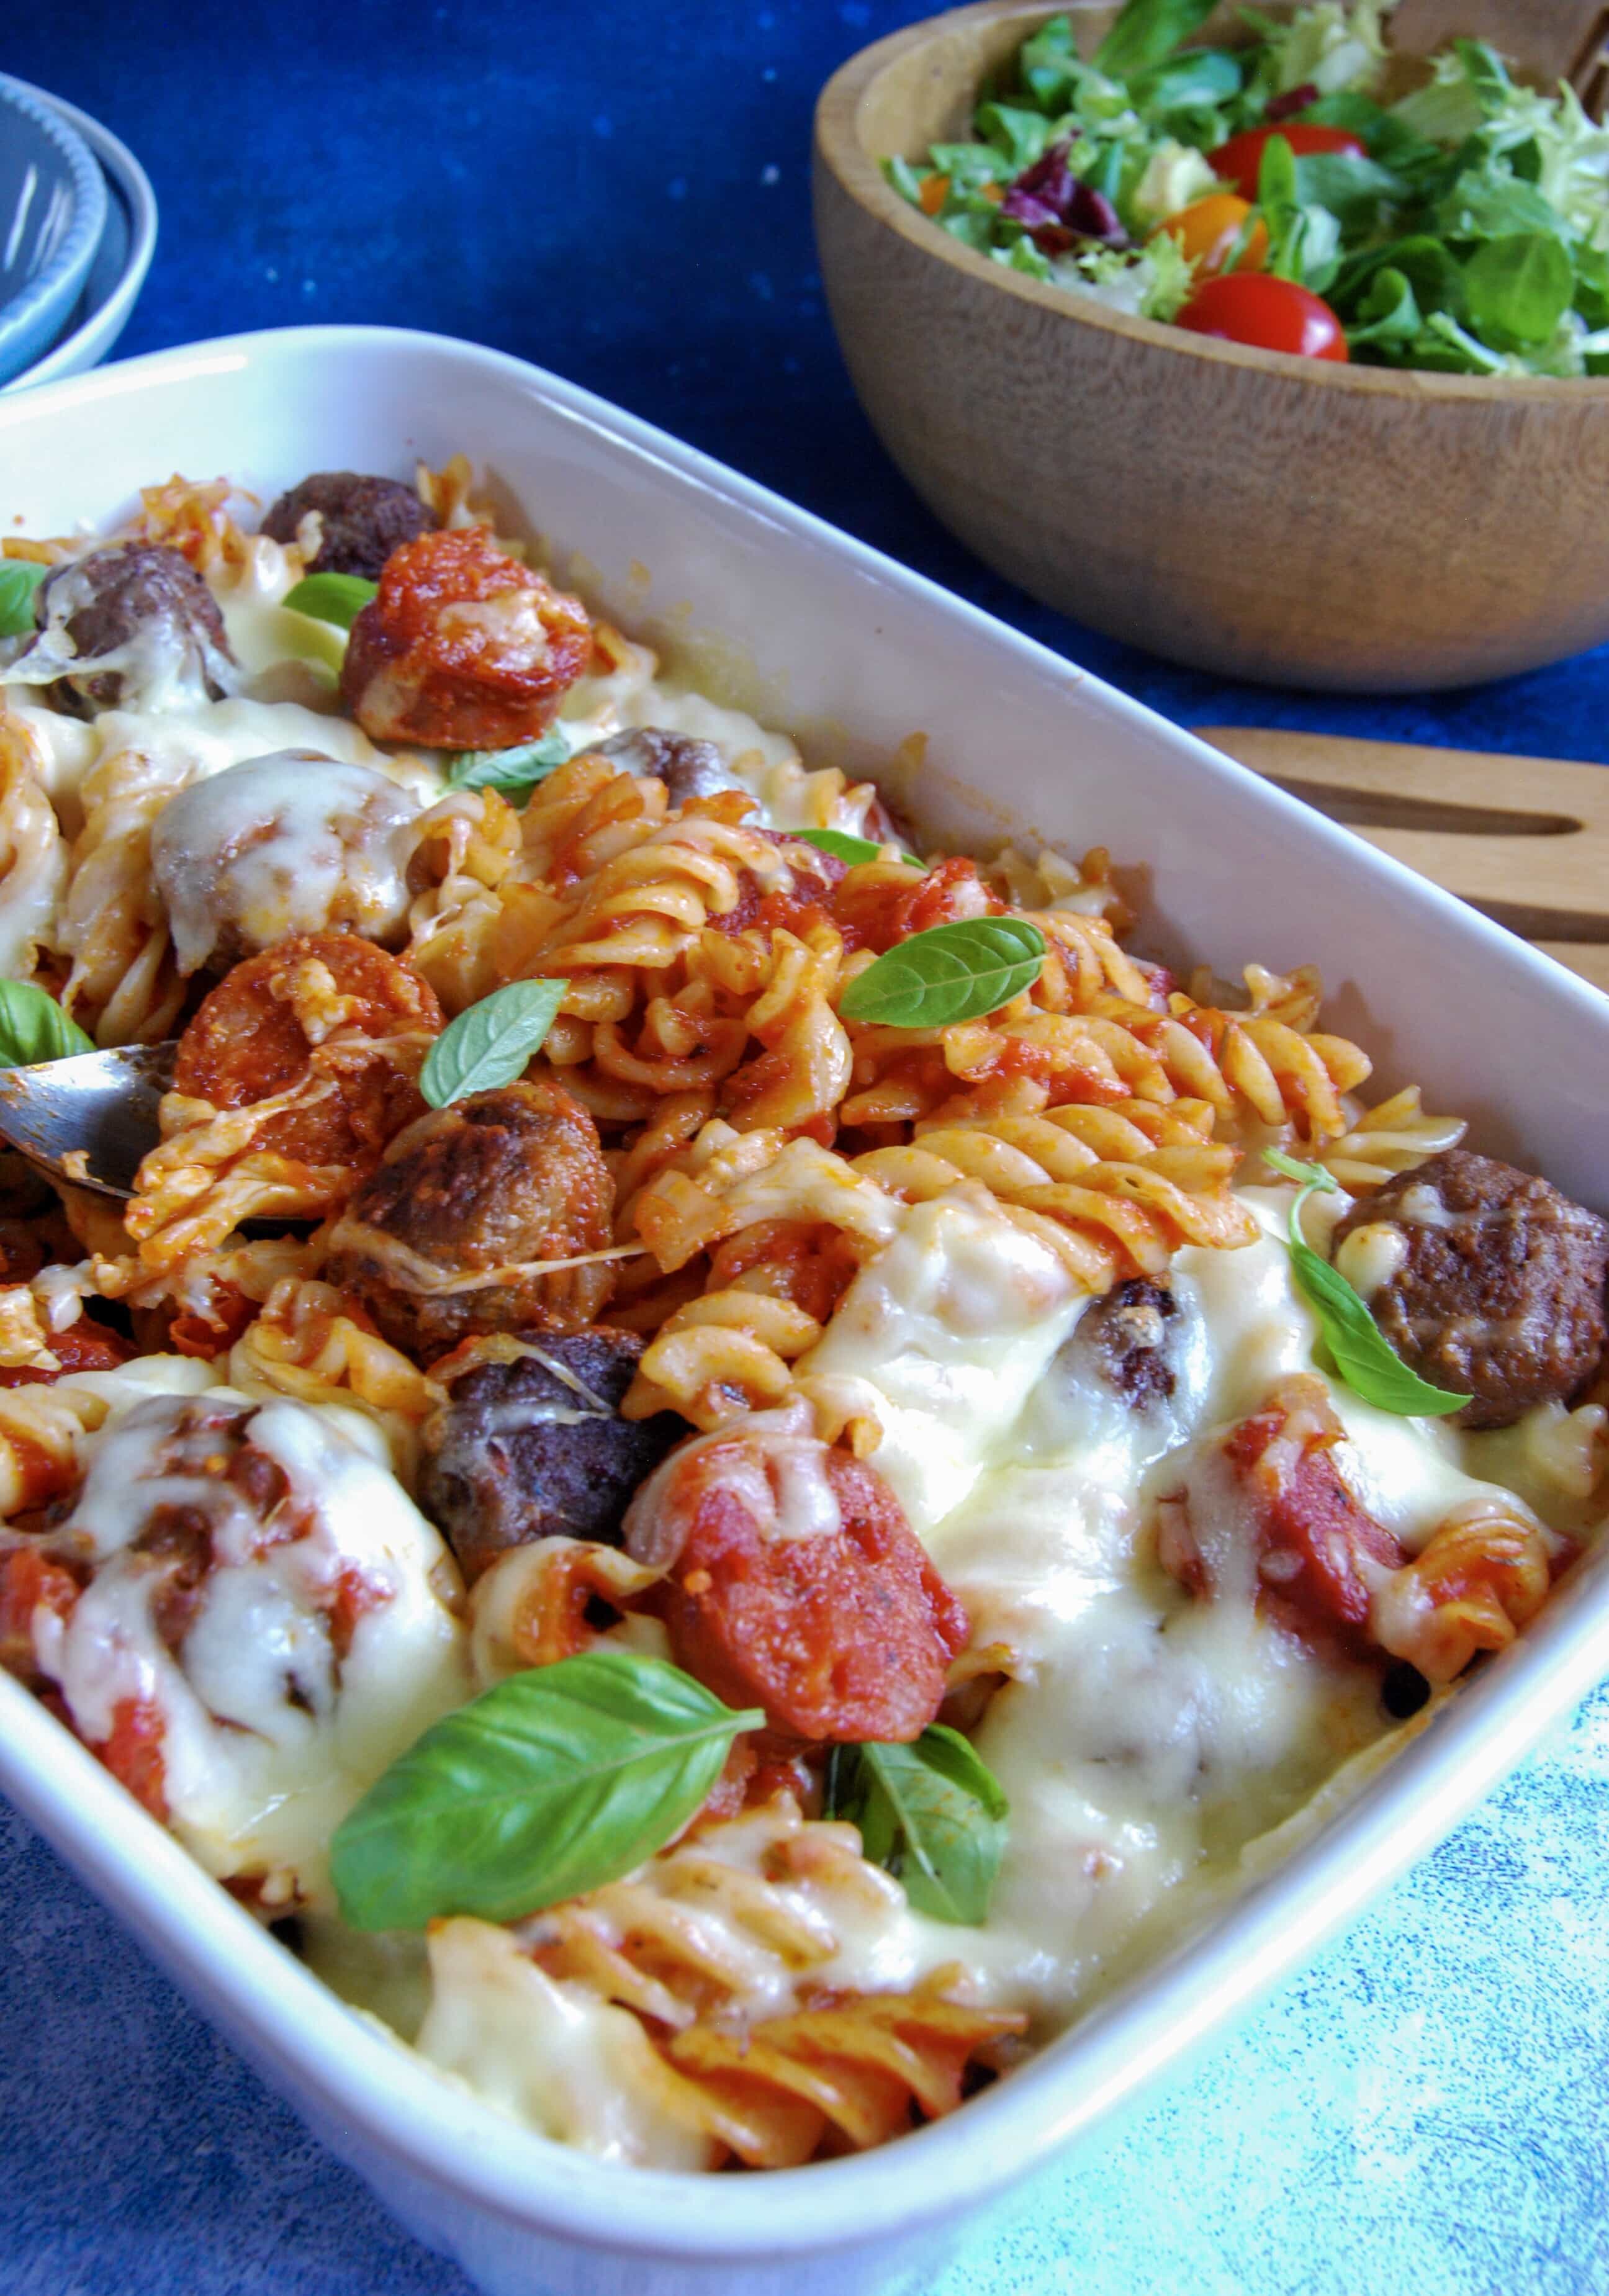 A picture of a mozzarella meatball pasta bake. A wooden bowl of salad can be seen in the background.